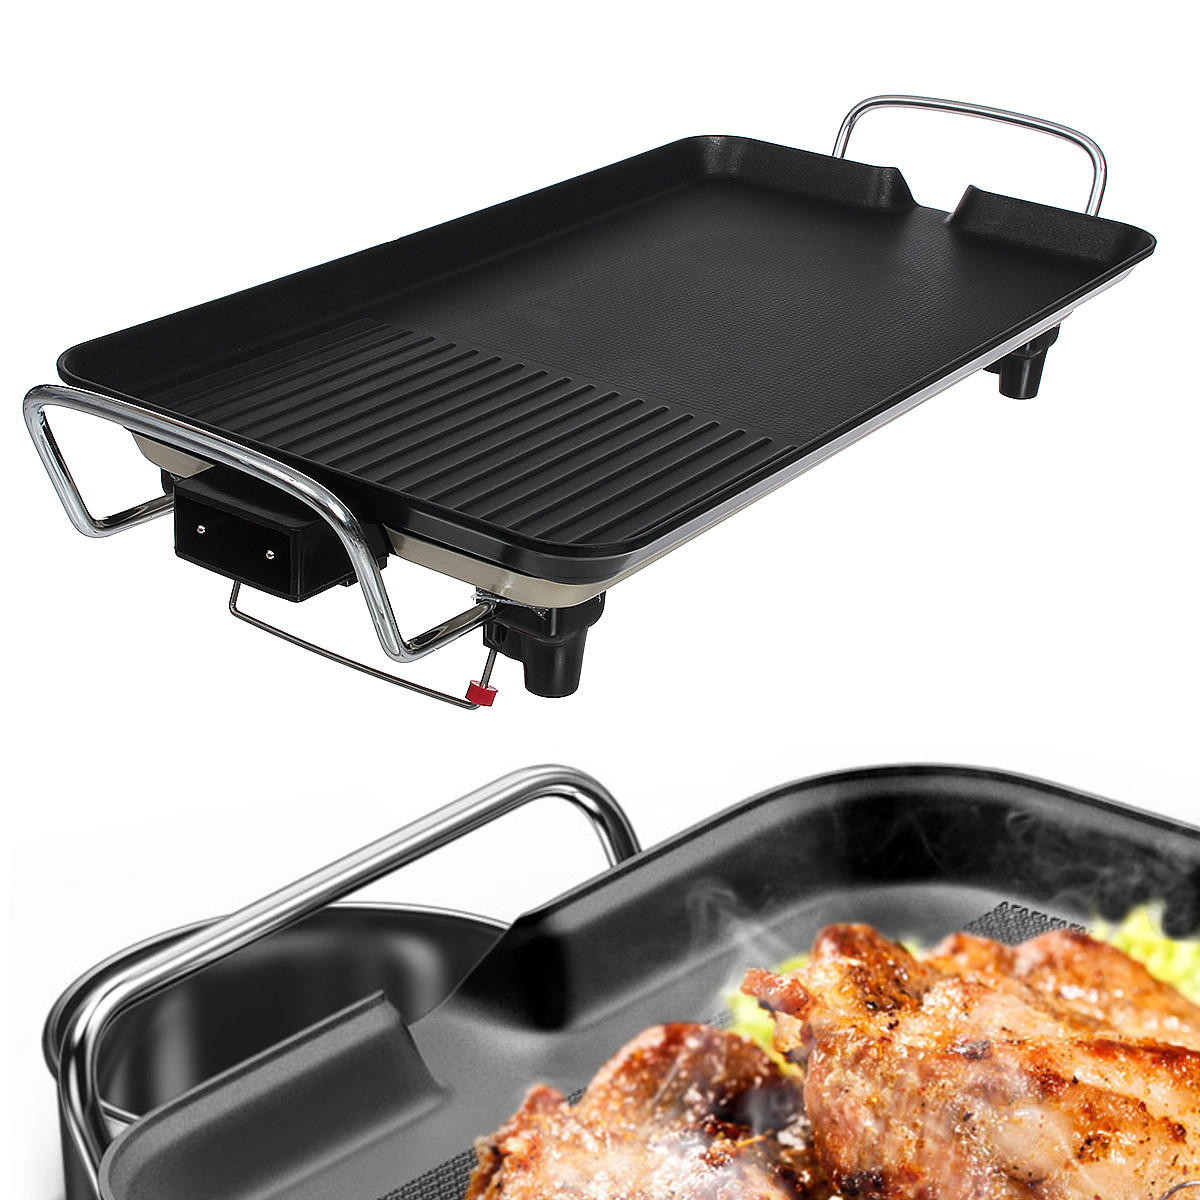 Image of 110V Smokeless Non Stick Electric Oven Baking Pan BBQ Barbecue Grill US Plug